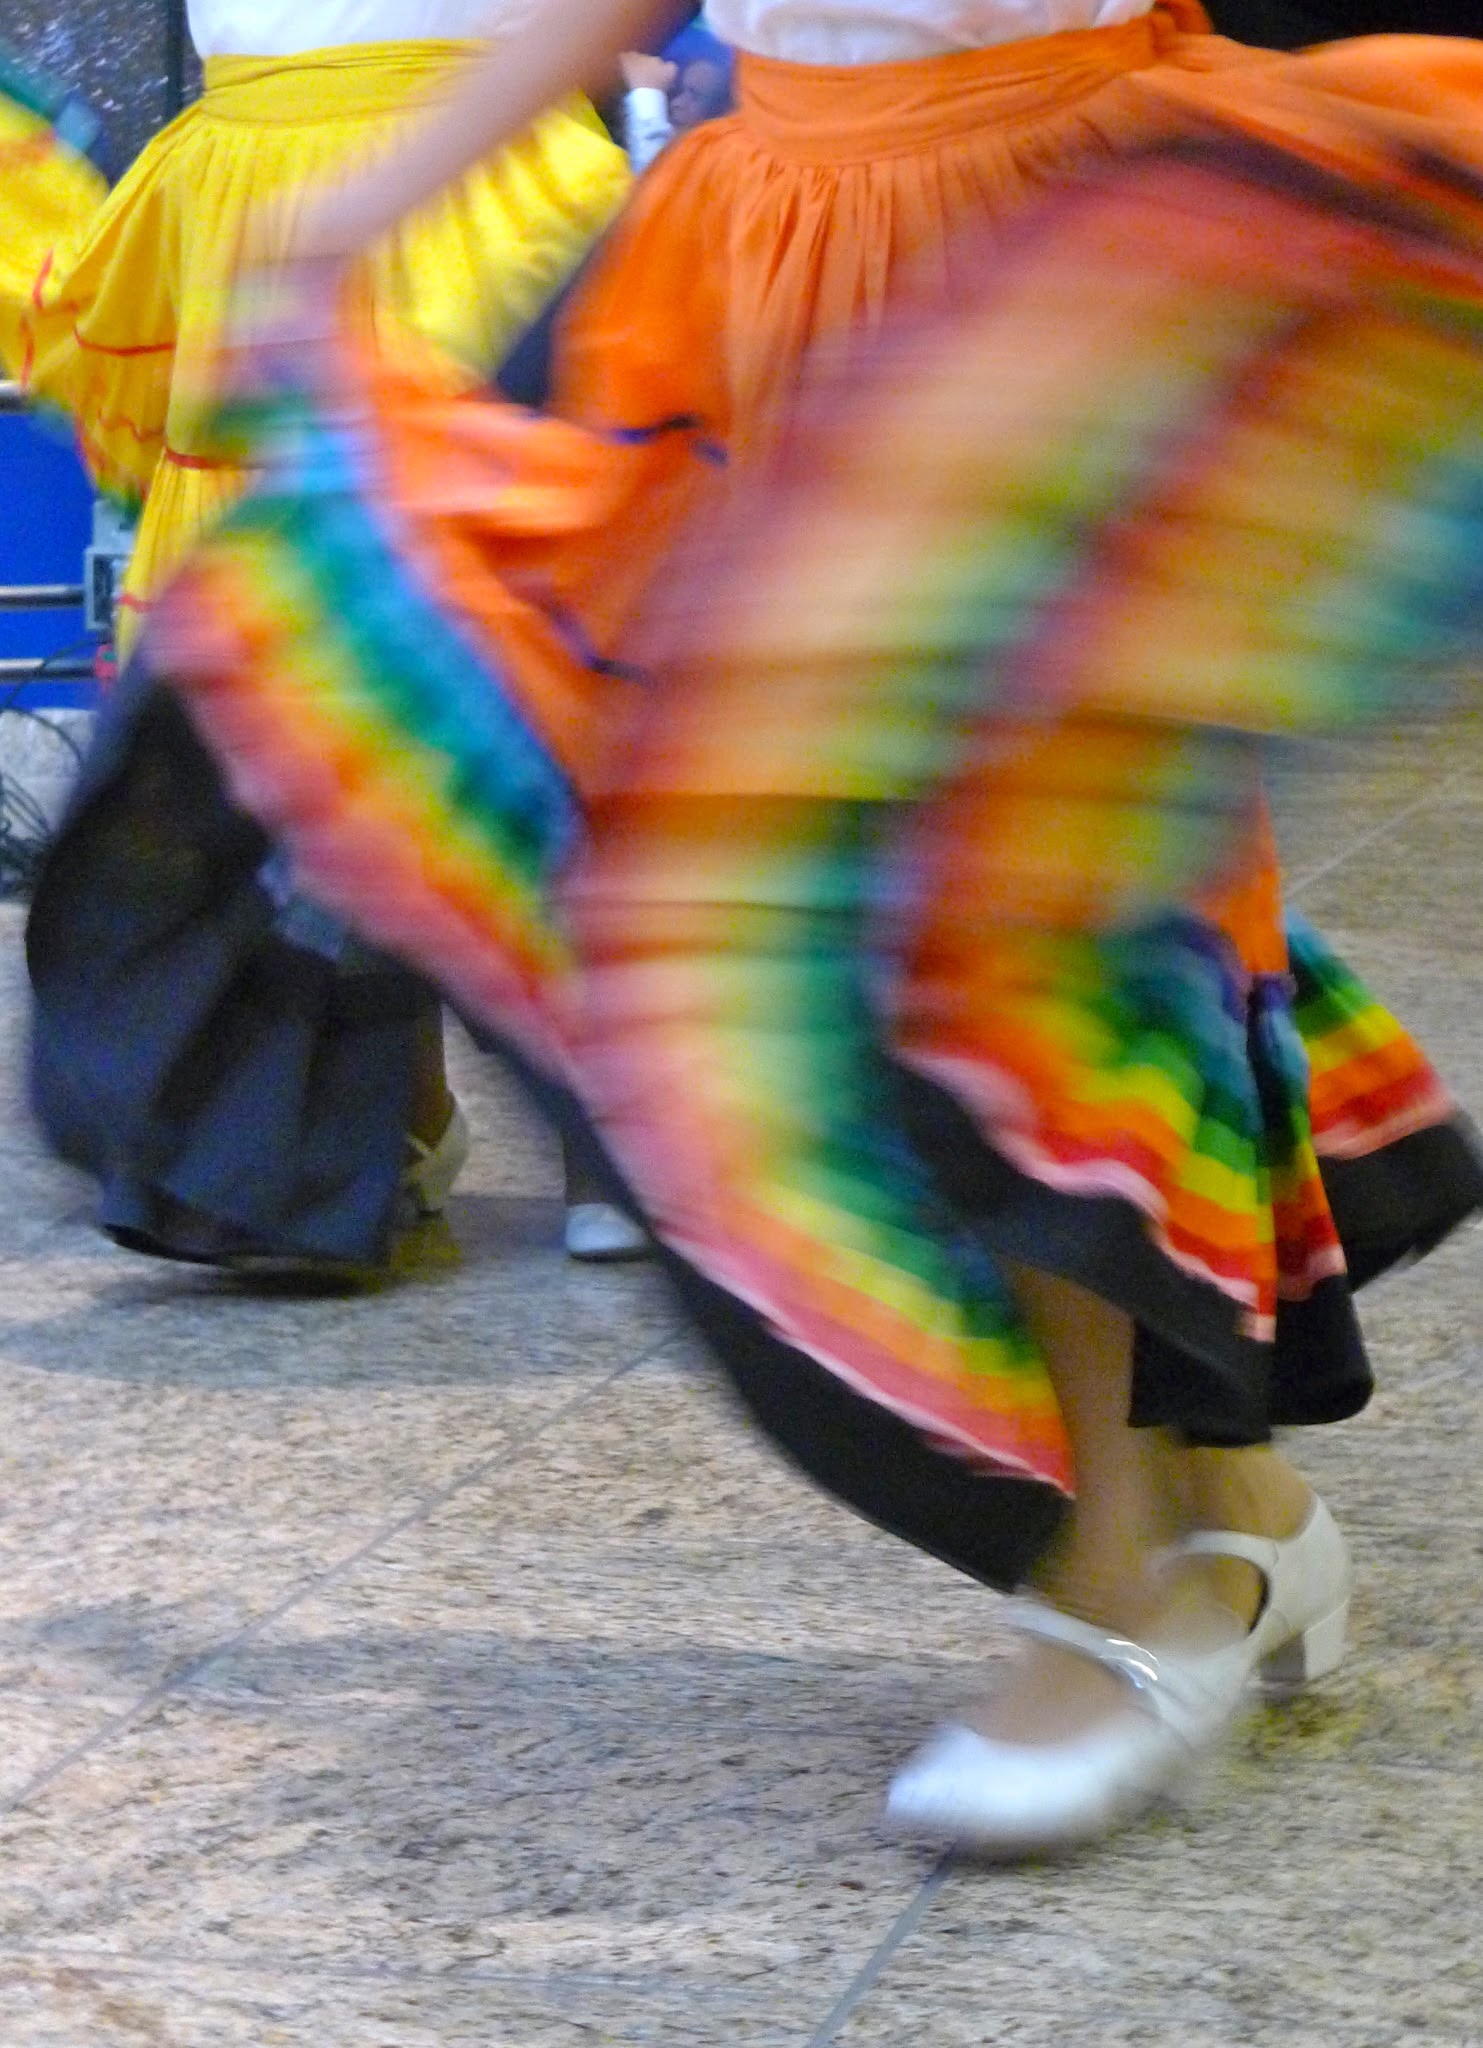 Local children from the Ballet Folklorica entertained us at the closing reception